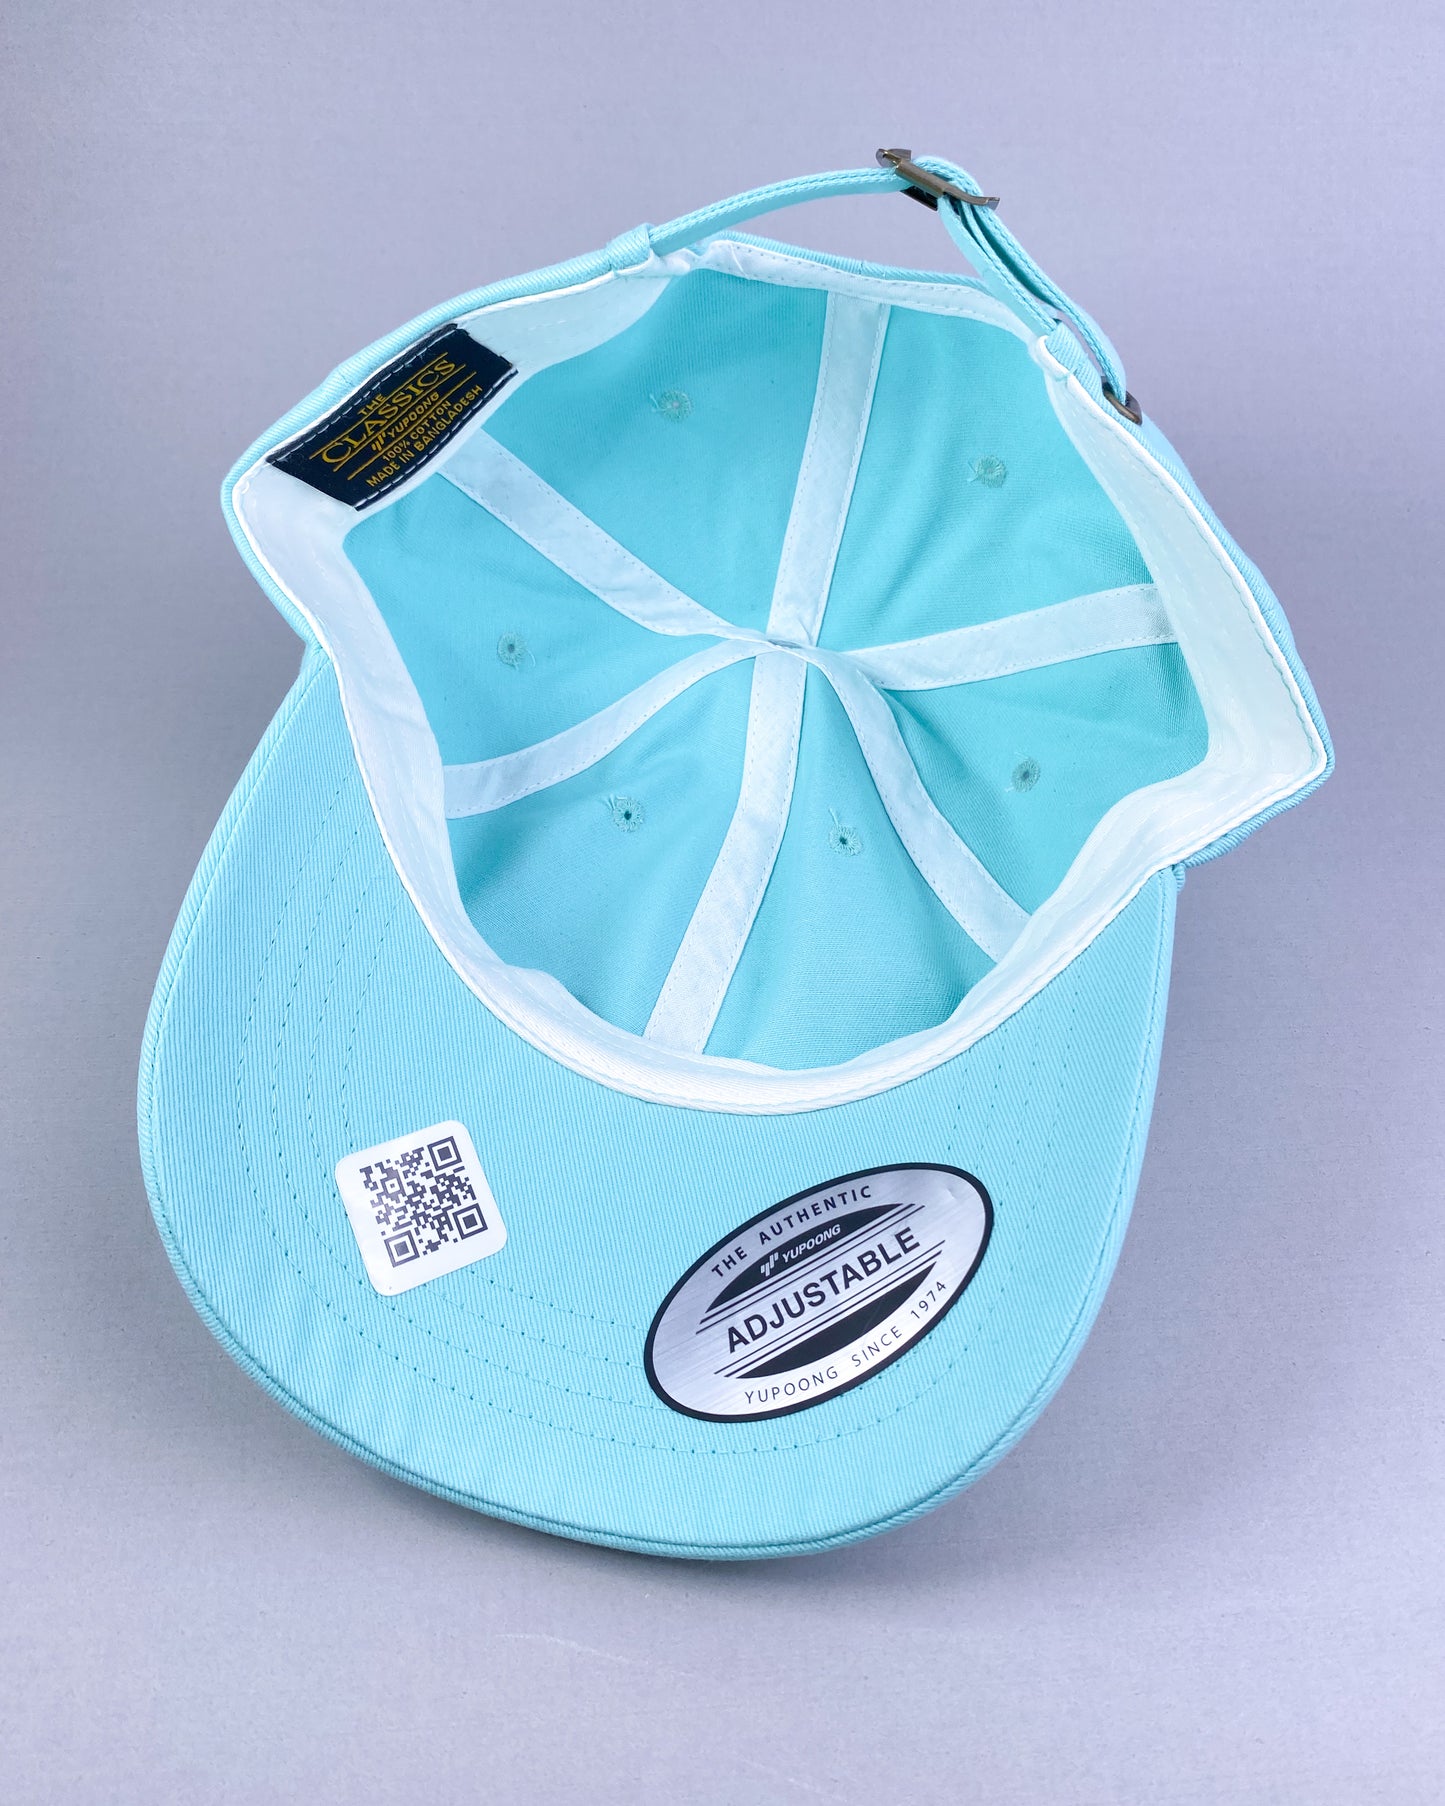 Bravo Premium hat in teal with flamingo design leather patch